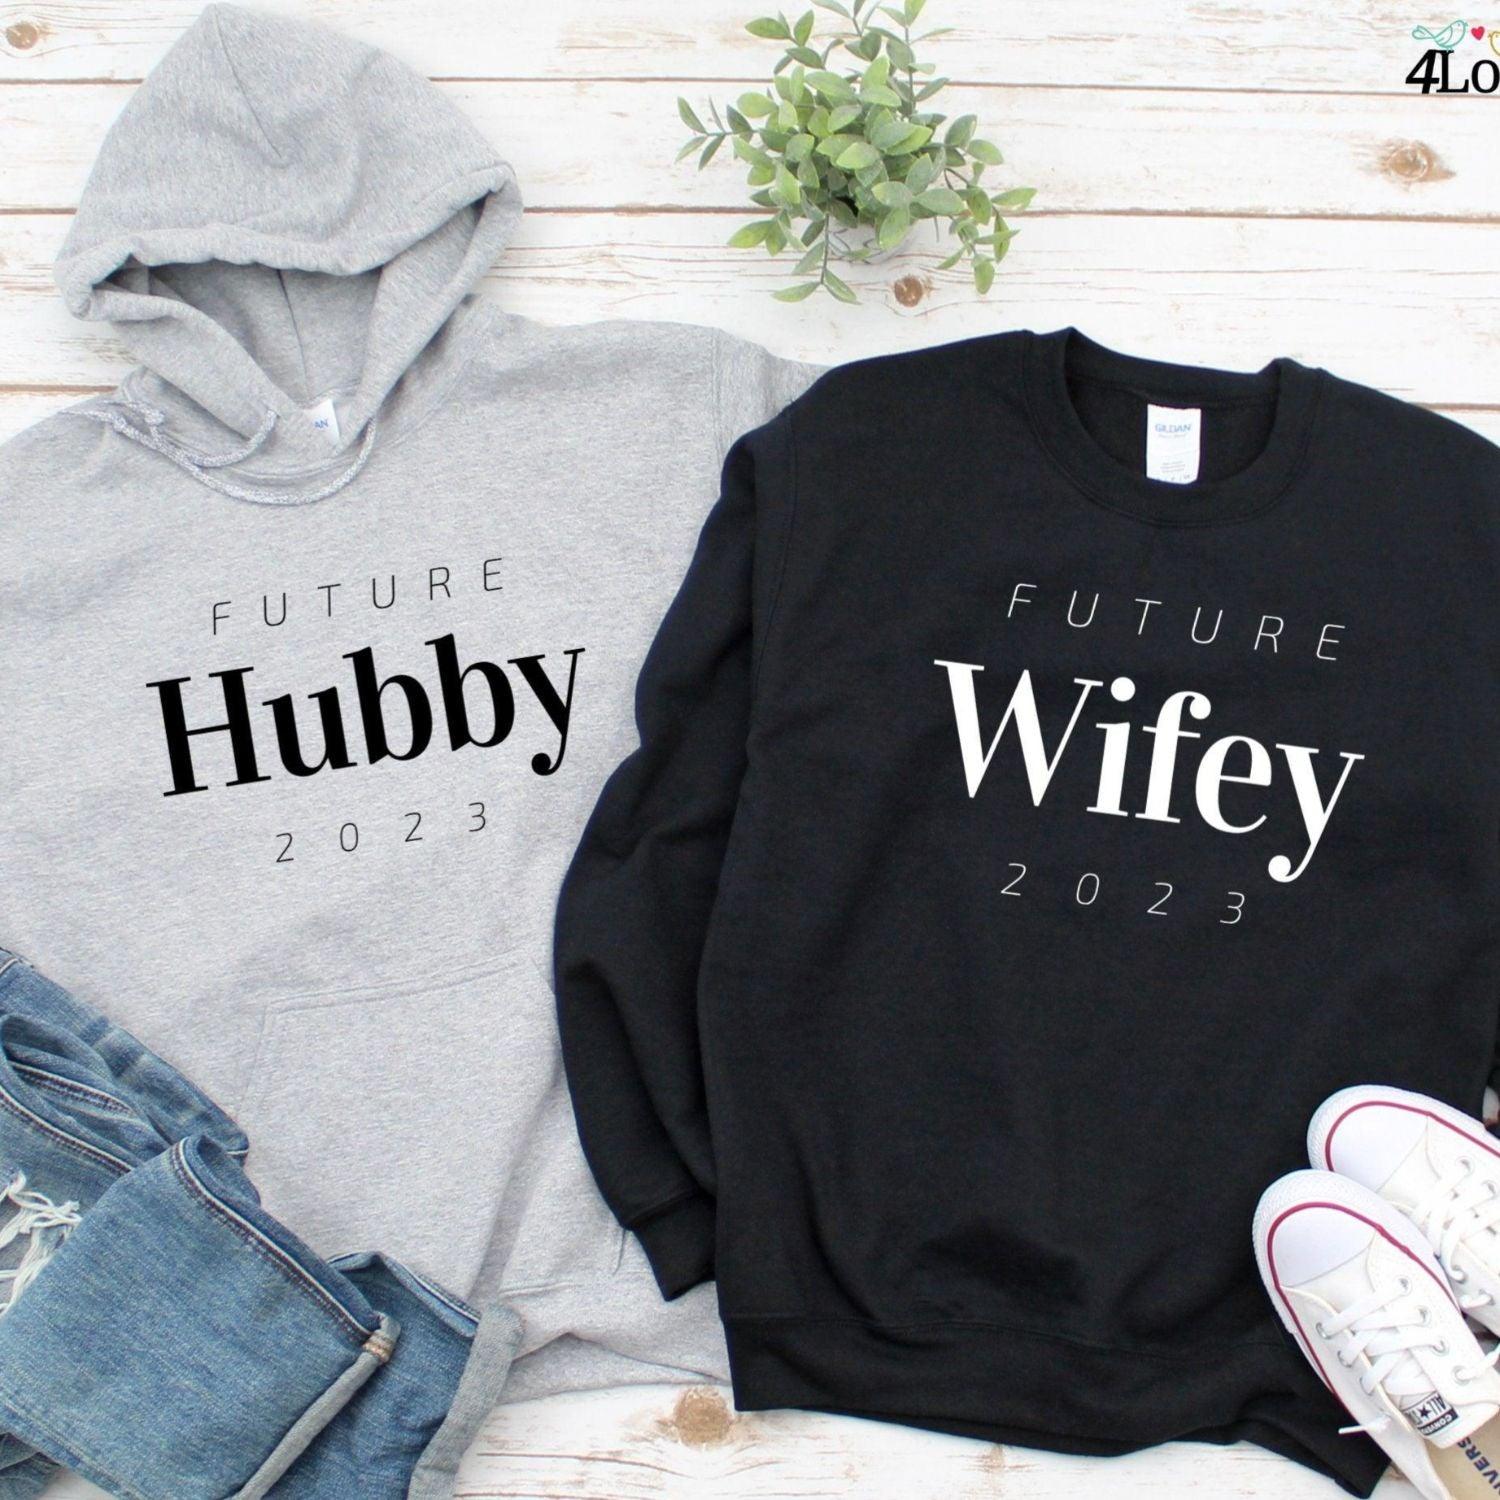 Personalized Future Hubby & Wifey Matching Outfits | Custom Fiancé & Fiancée Set with Year - 4Lovebirds